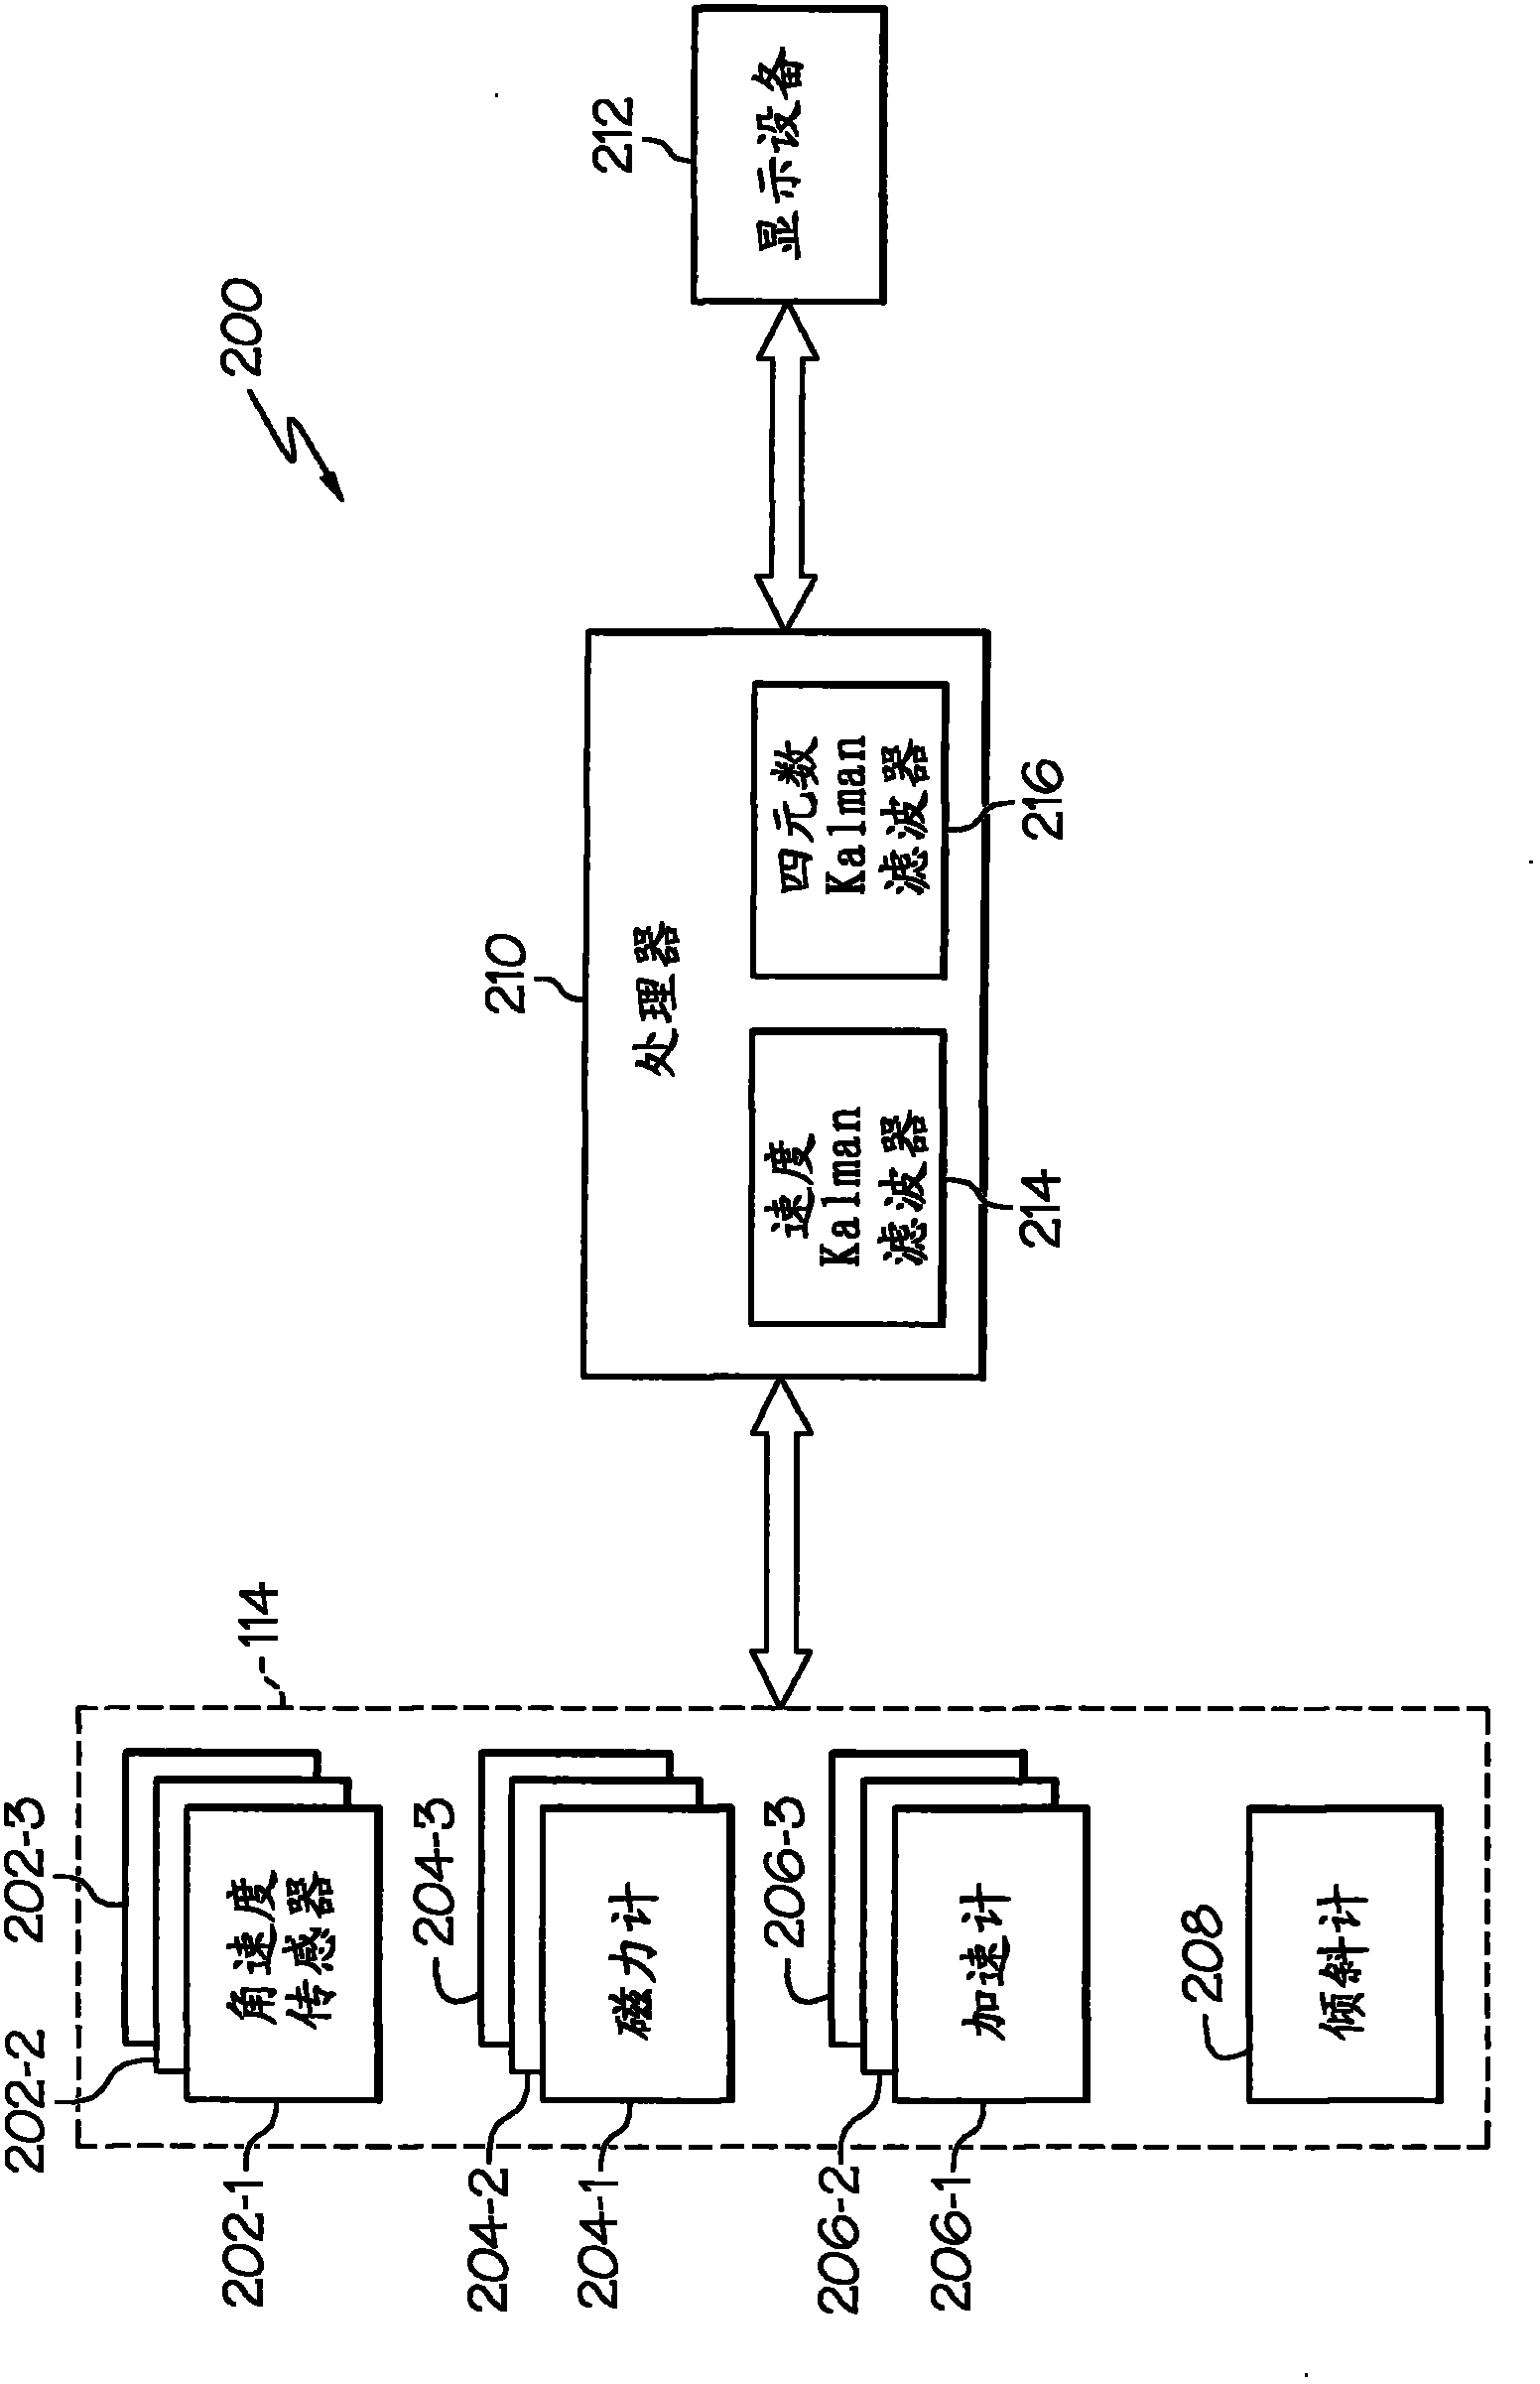 Crane jib attitude and heading reference system and method